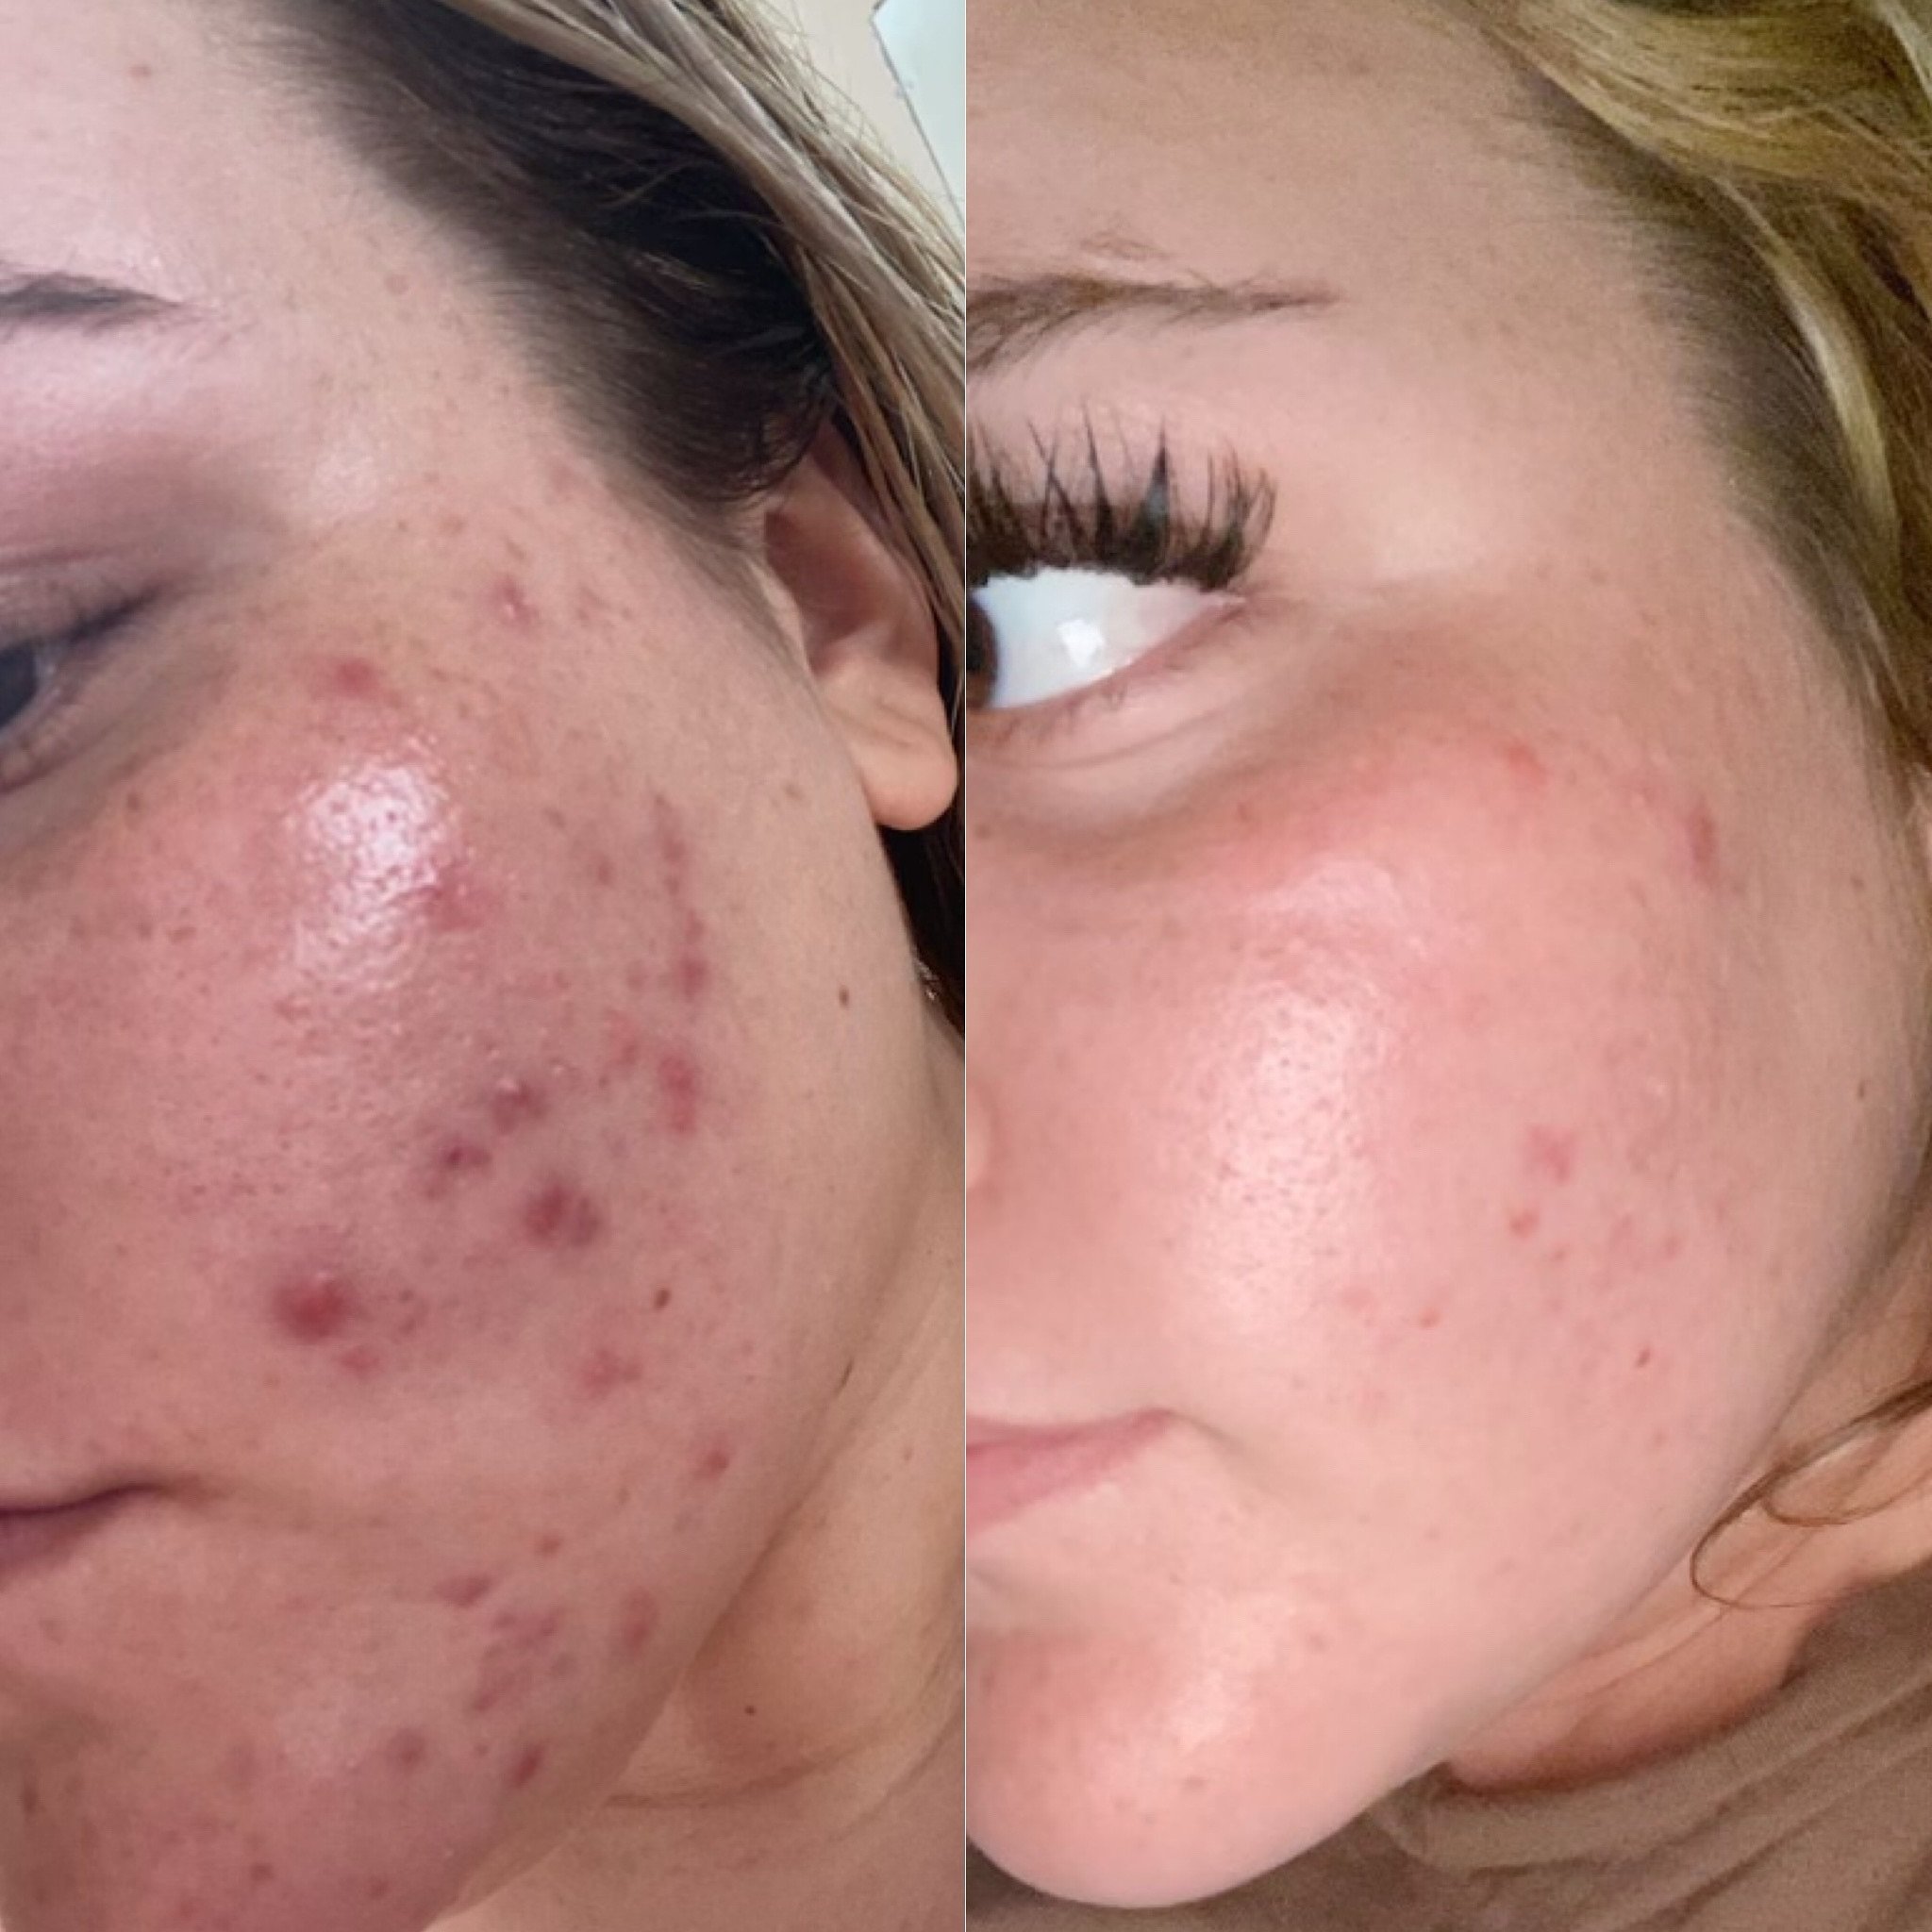 Treating acne isn&rsquo;t hard. Treating acne by yourself IS HARD. Get clear skin in 3-4 months guaranteed with unfiltered self. We use the #1 professional acne brand @facerealityskincare and see over a 95% success rate. Book a consultation or your f